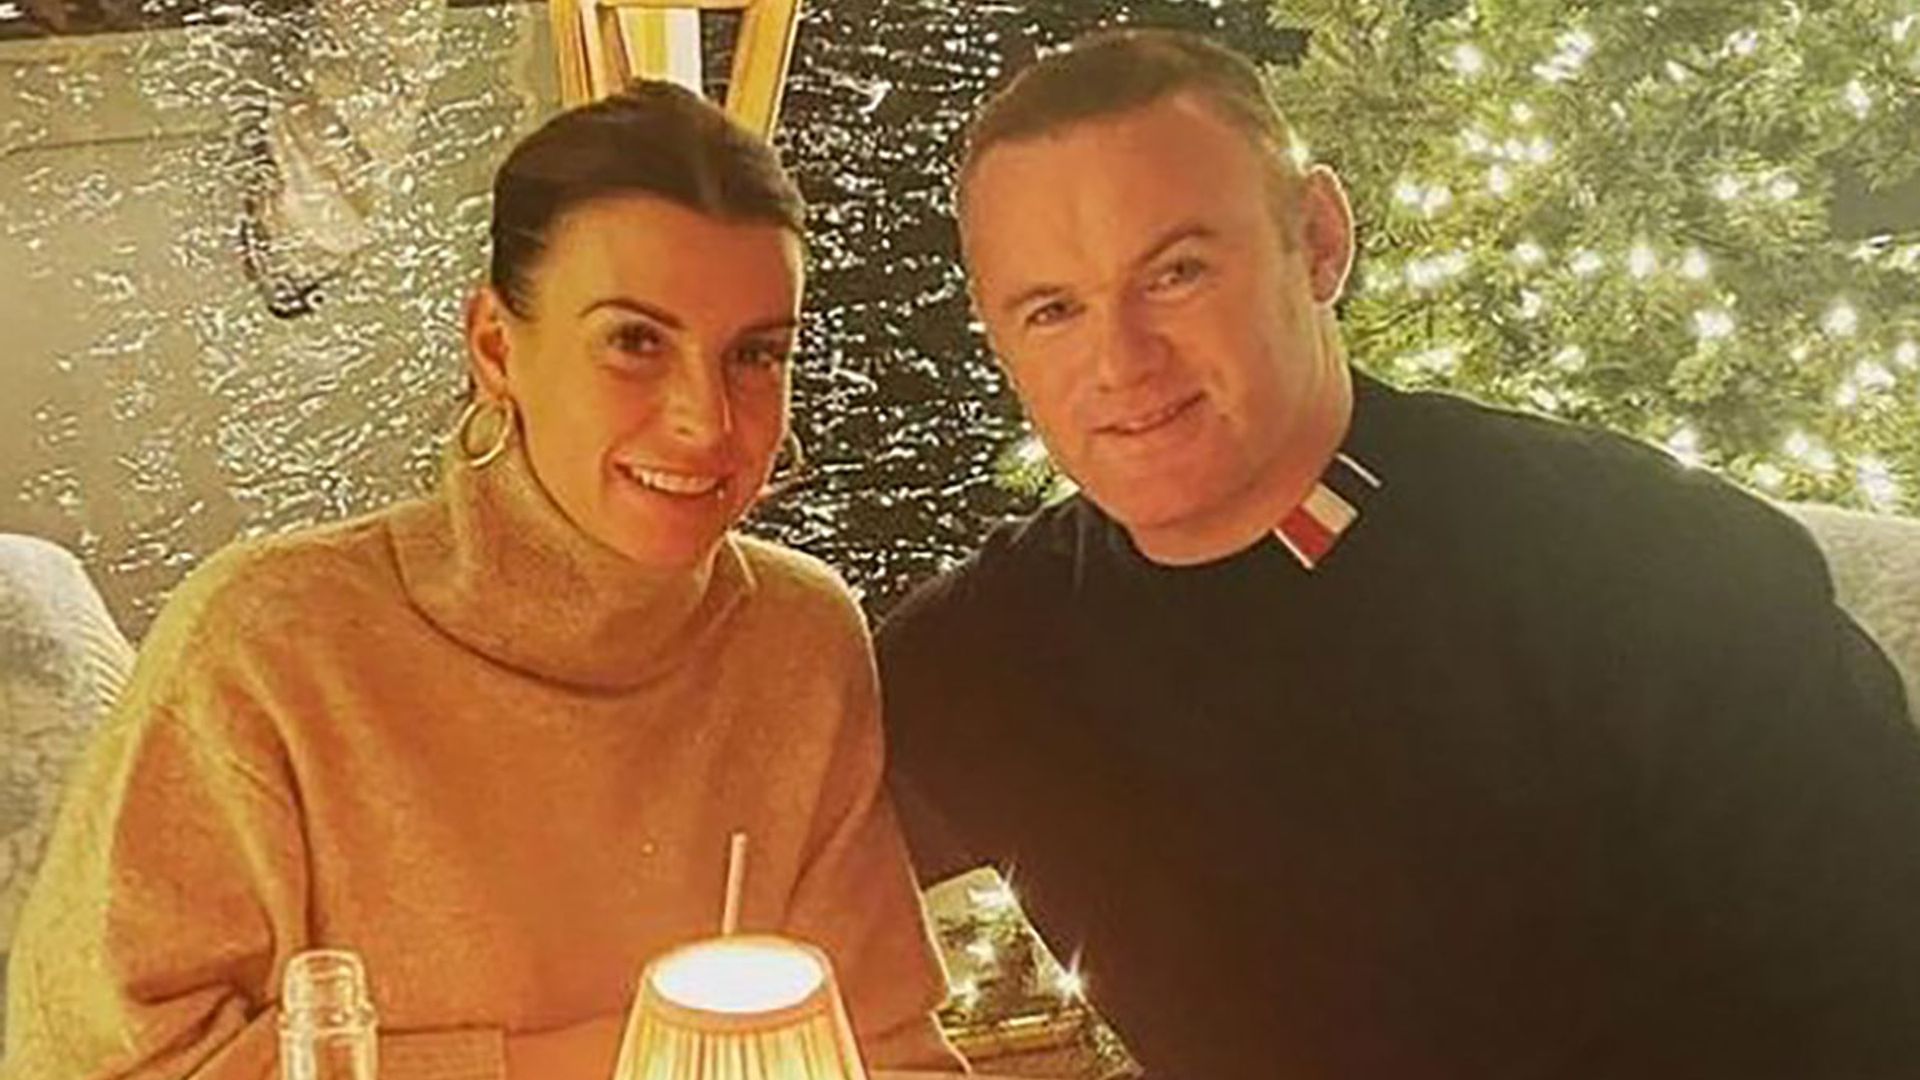 Wayne Rooney breaks silence with new holiday photo after end of Wagatha Christie trial